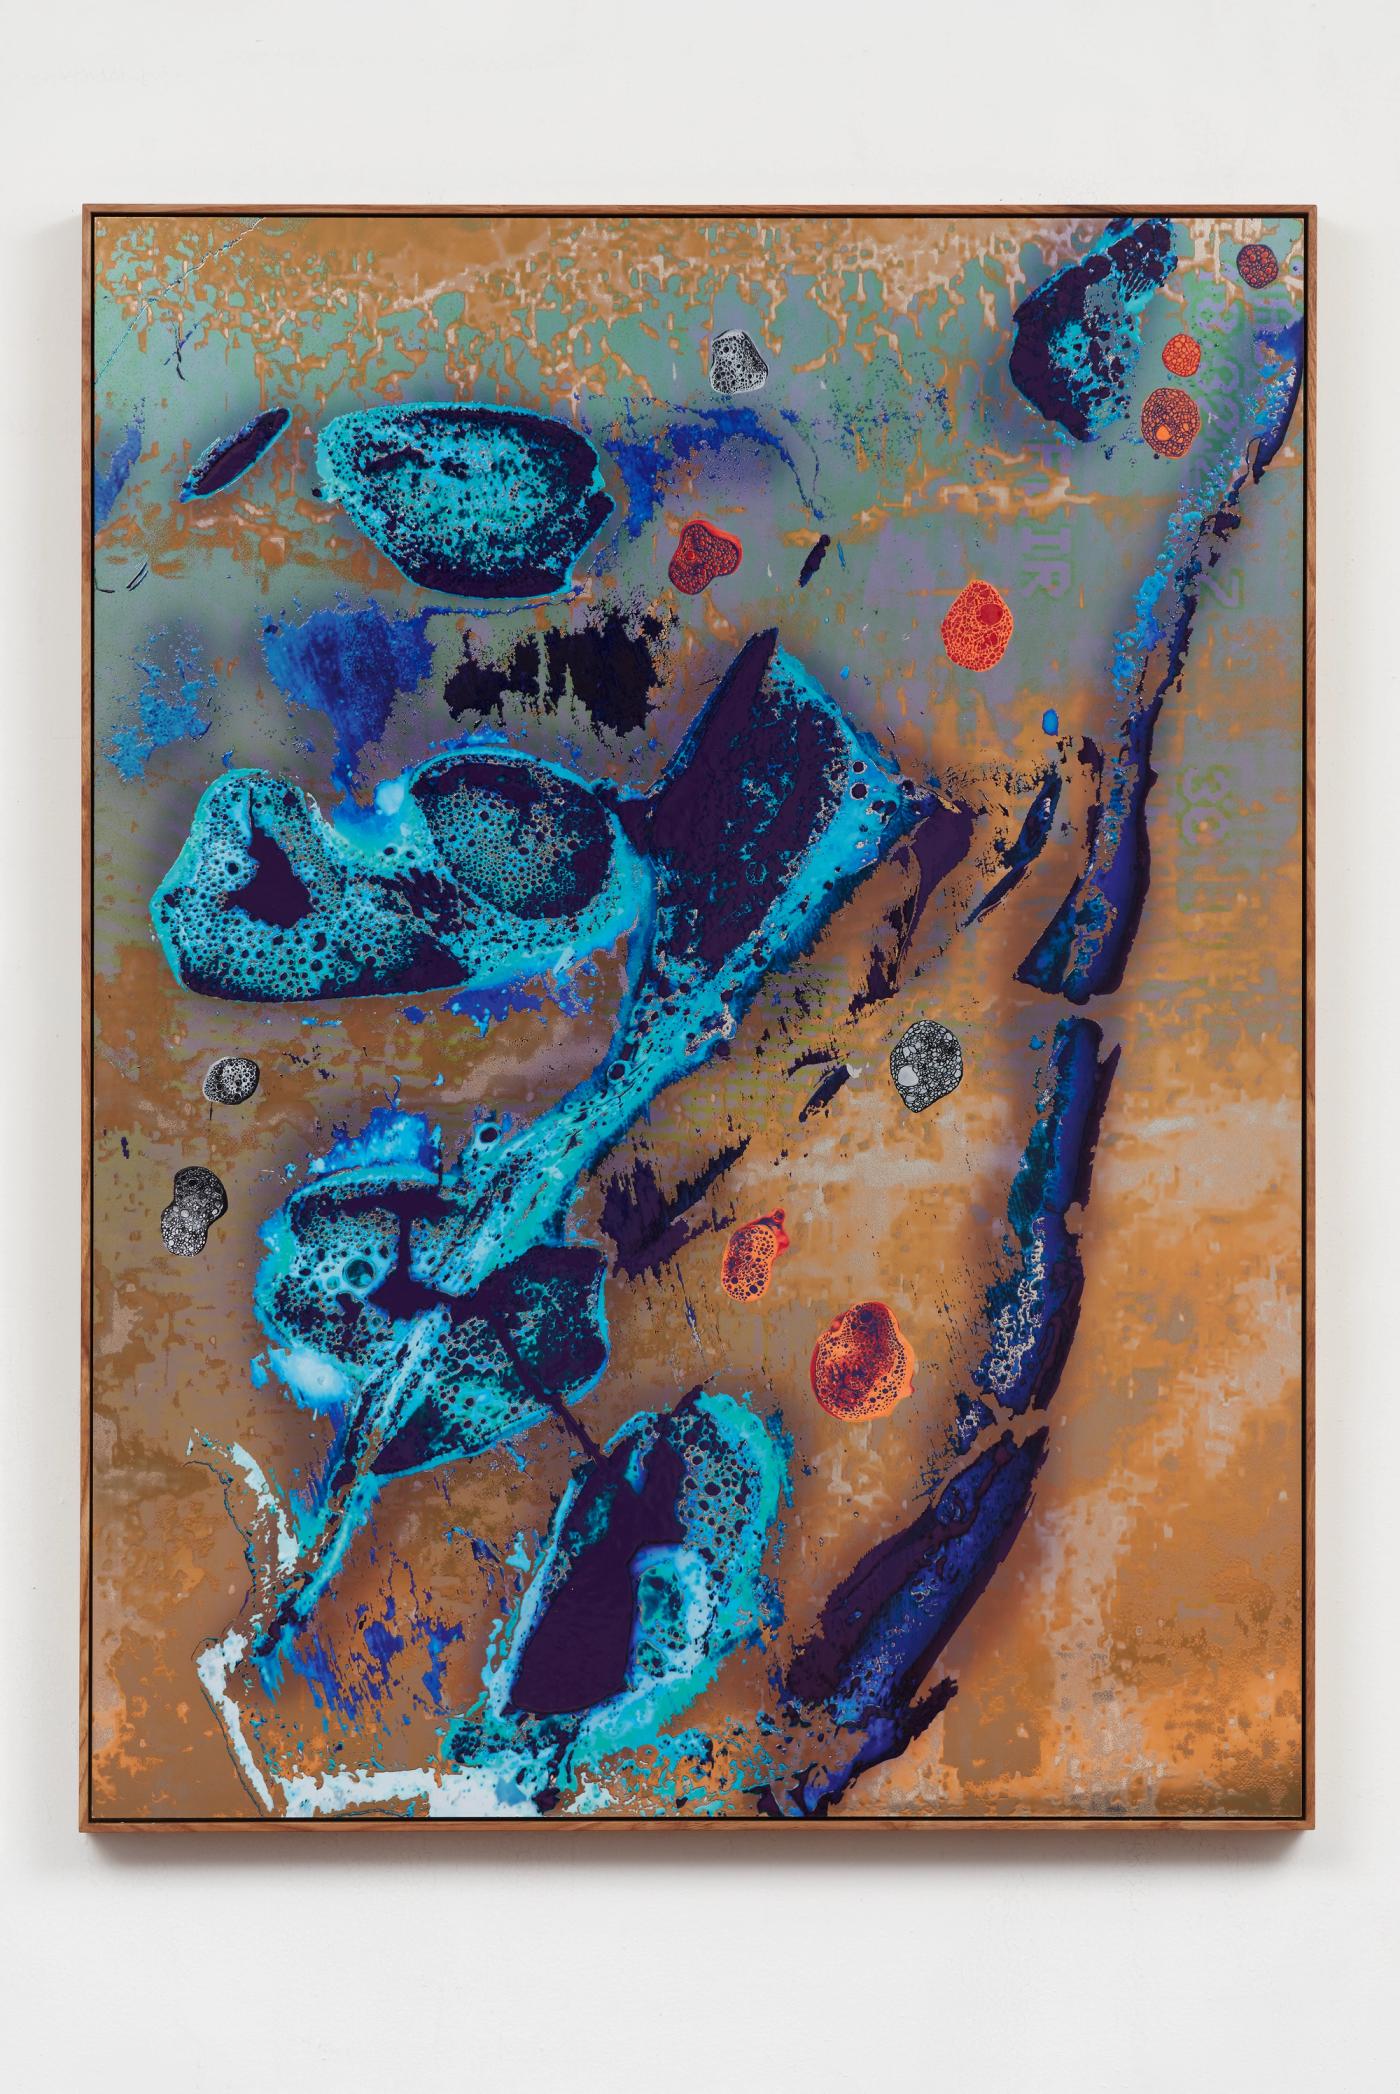 Image of In Between Channel (A Gauze Pad of Sarcasm), 2023: Oil paint, varnish, UV-cured ink on mirror polished aluminum laminate in artist's frame